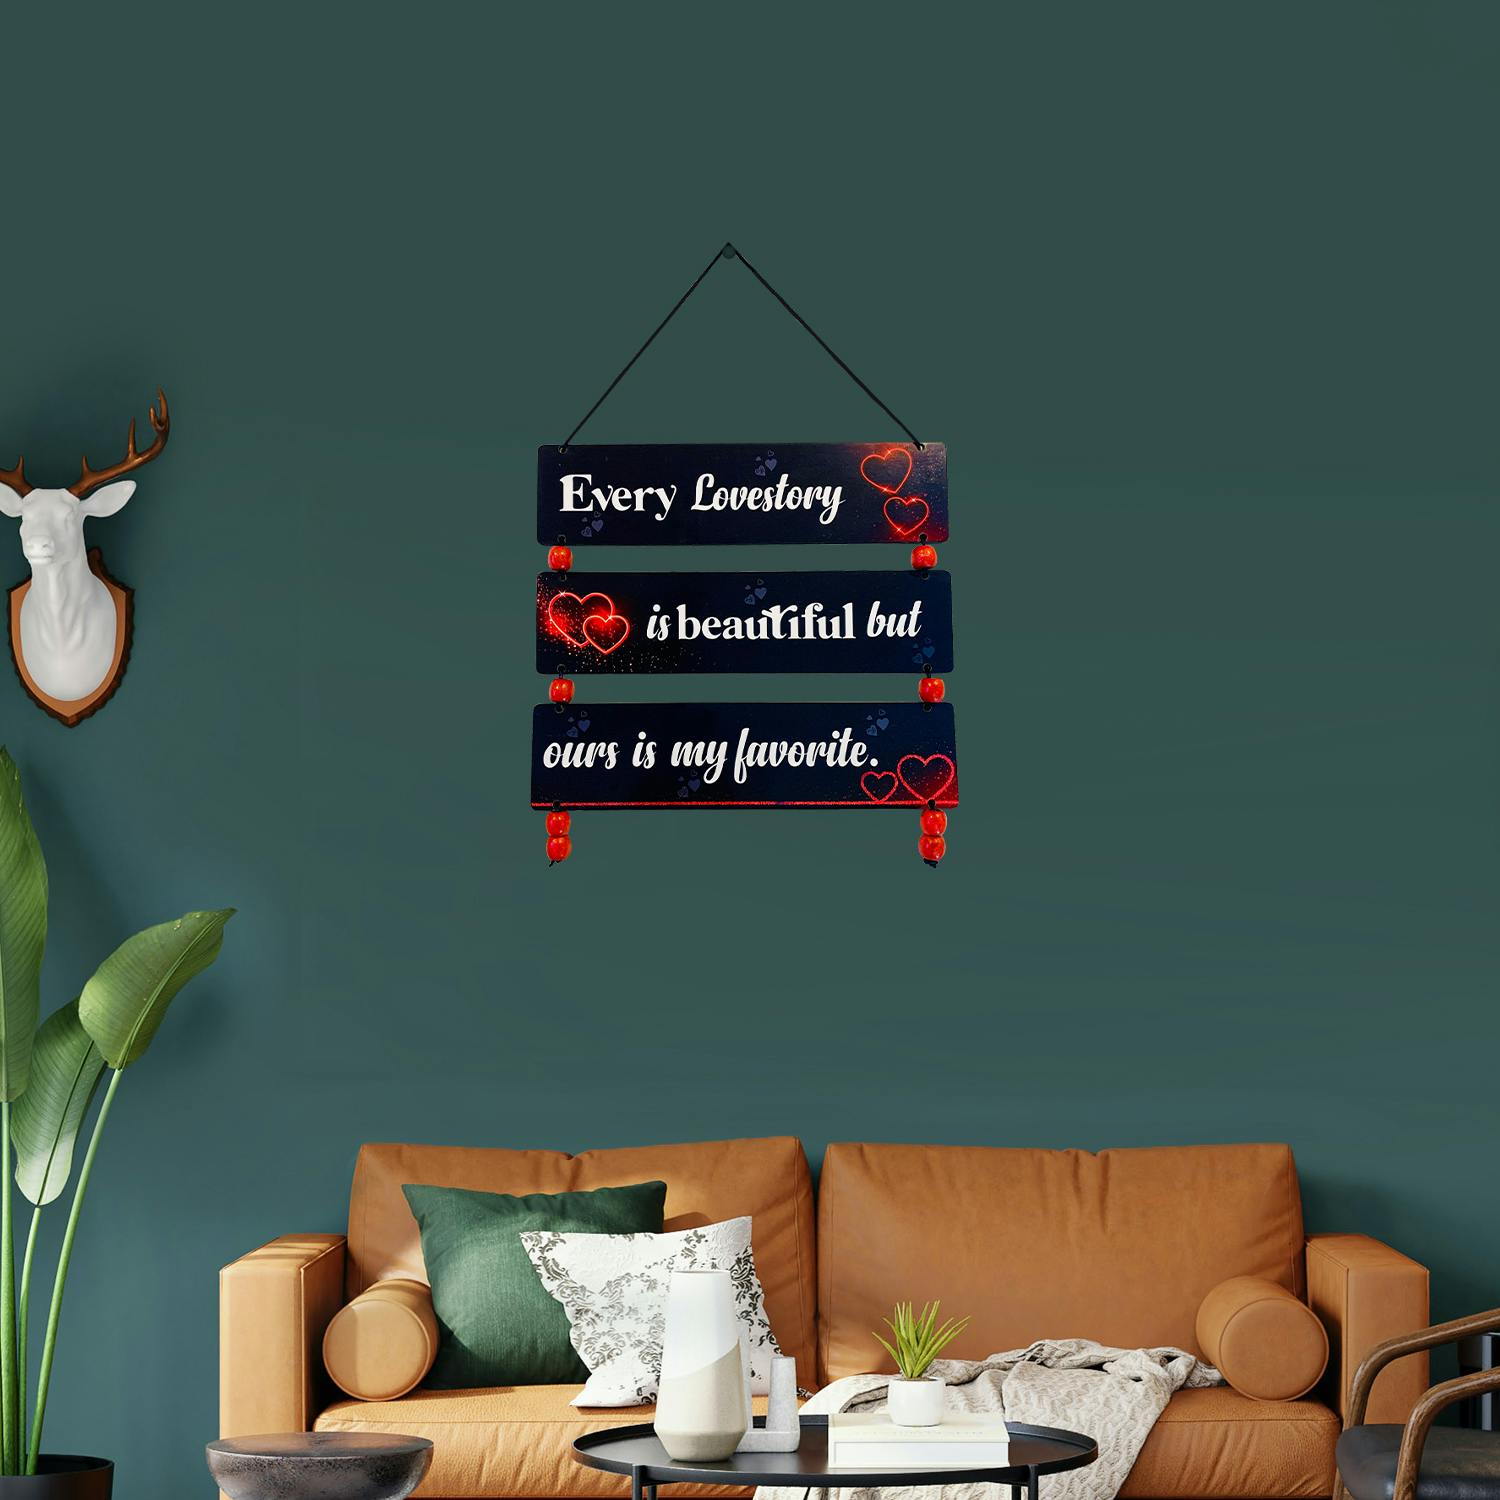 Every LoveStory is Beautiful but our is favorite wall hanging